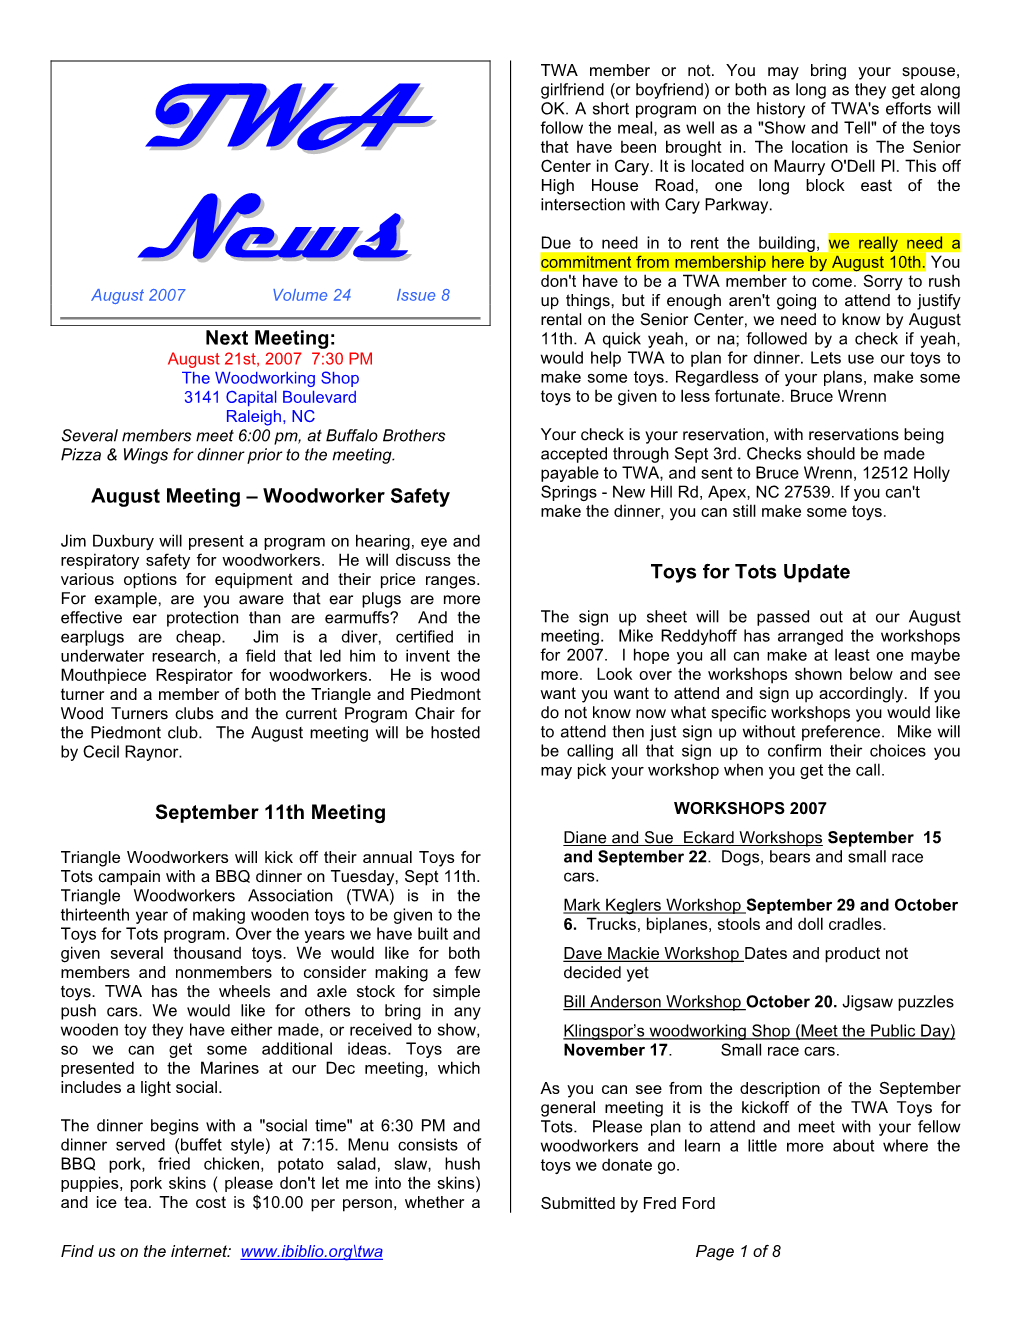 TWA News Is Published Monthly by the TWA and Is Mailed to If You Are Borrowing This from a Friend, Or Sneaking a Members, Sponsors, and Associates